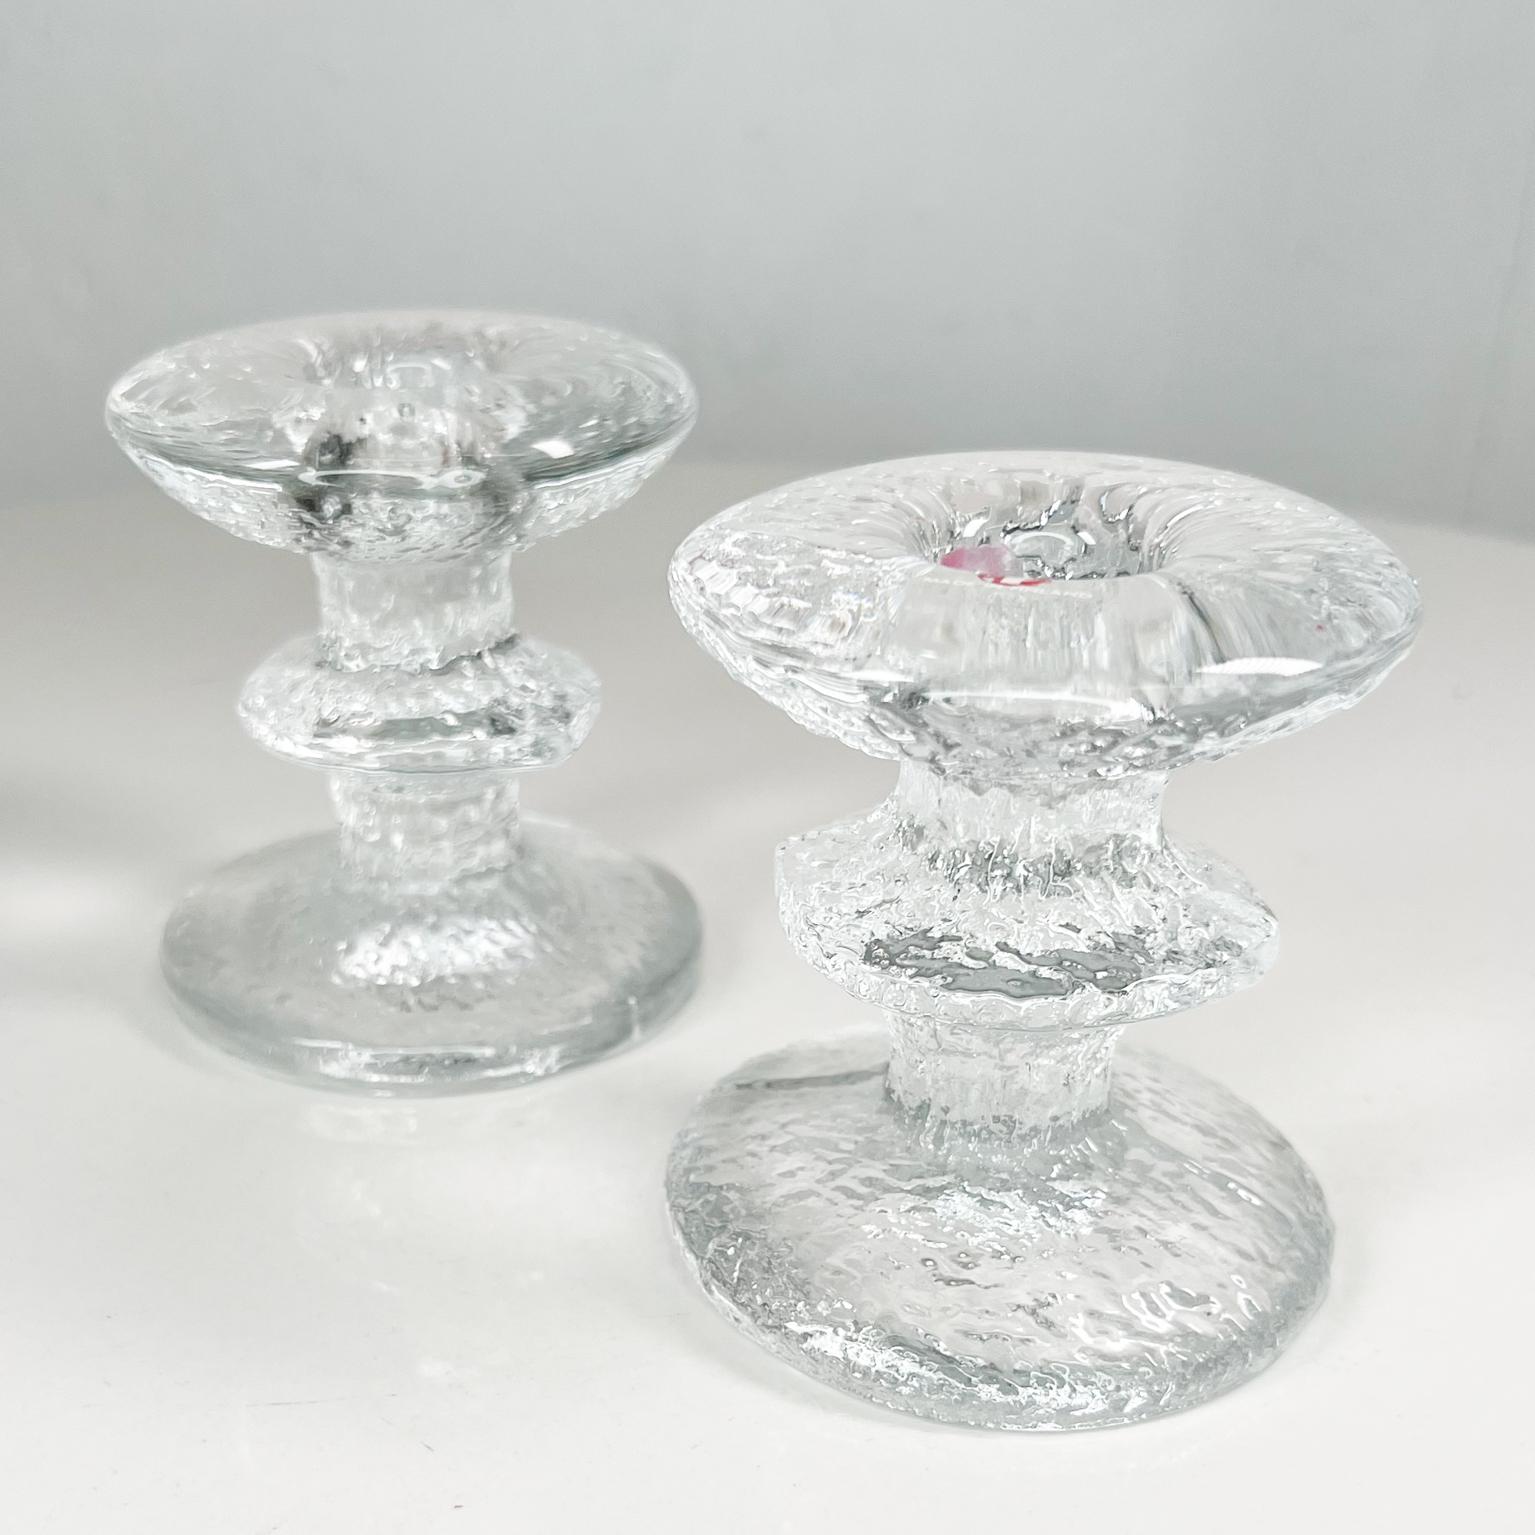 1967 Festivo Ring Art Glass Candle Holders by Timo Sarpaneva Finland In Good Condition For Sale In Chula Vista, CA